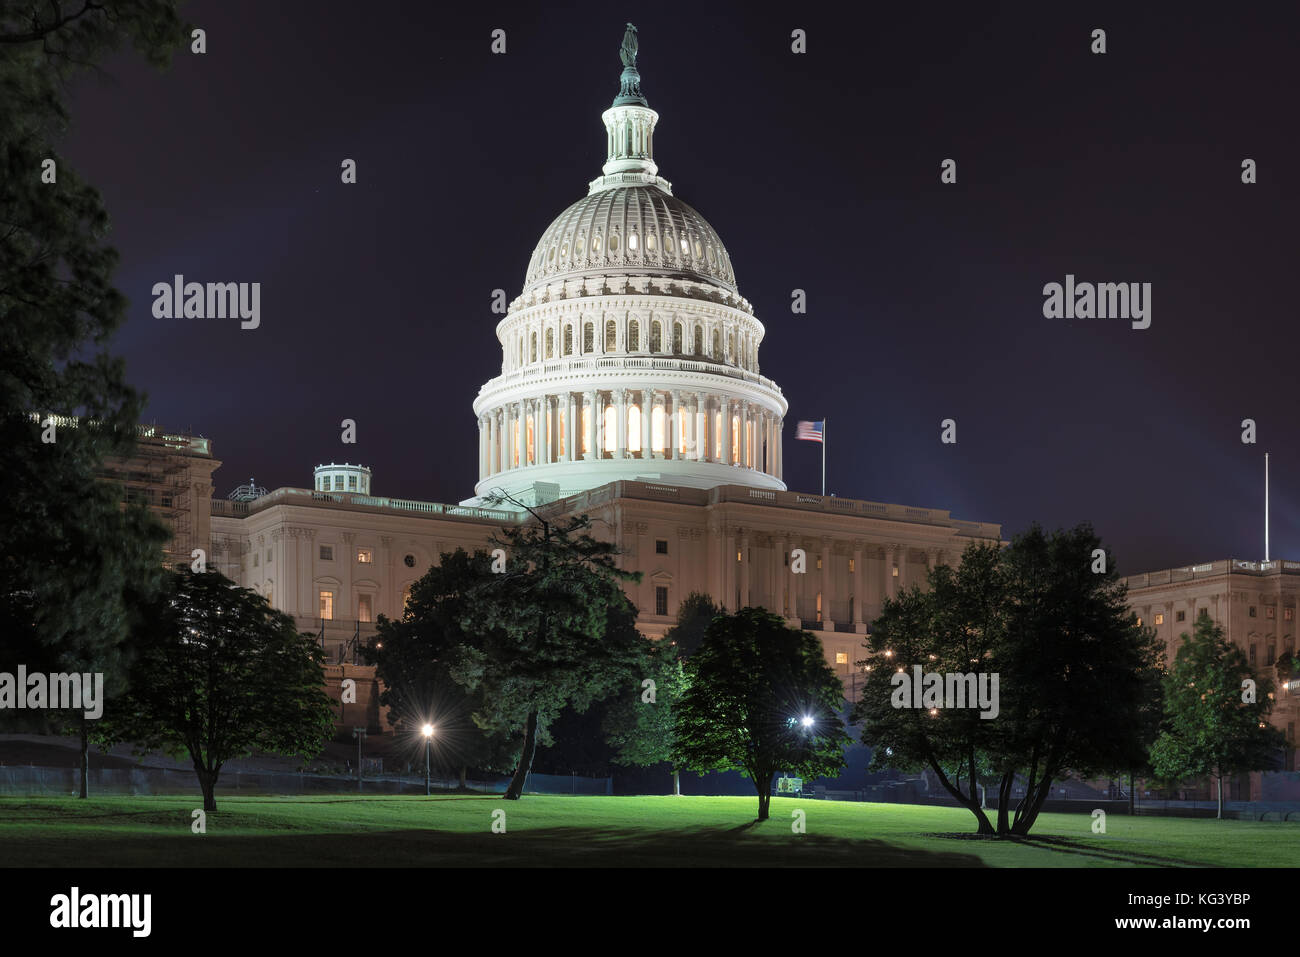 Us Capitol building at night - washington dc, united states Banque D'Images